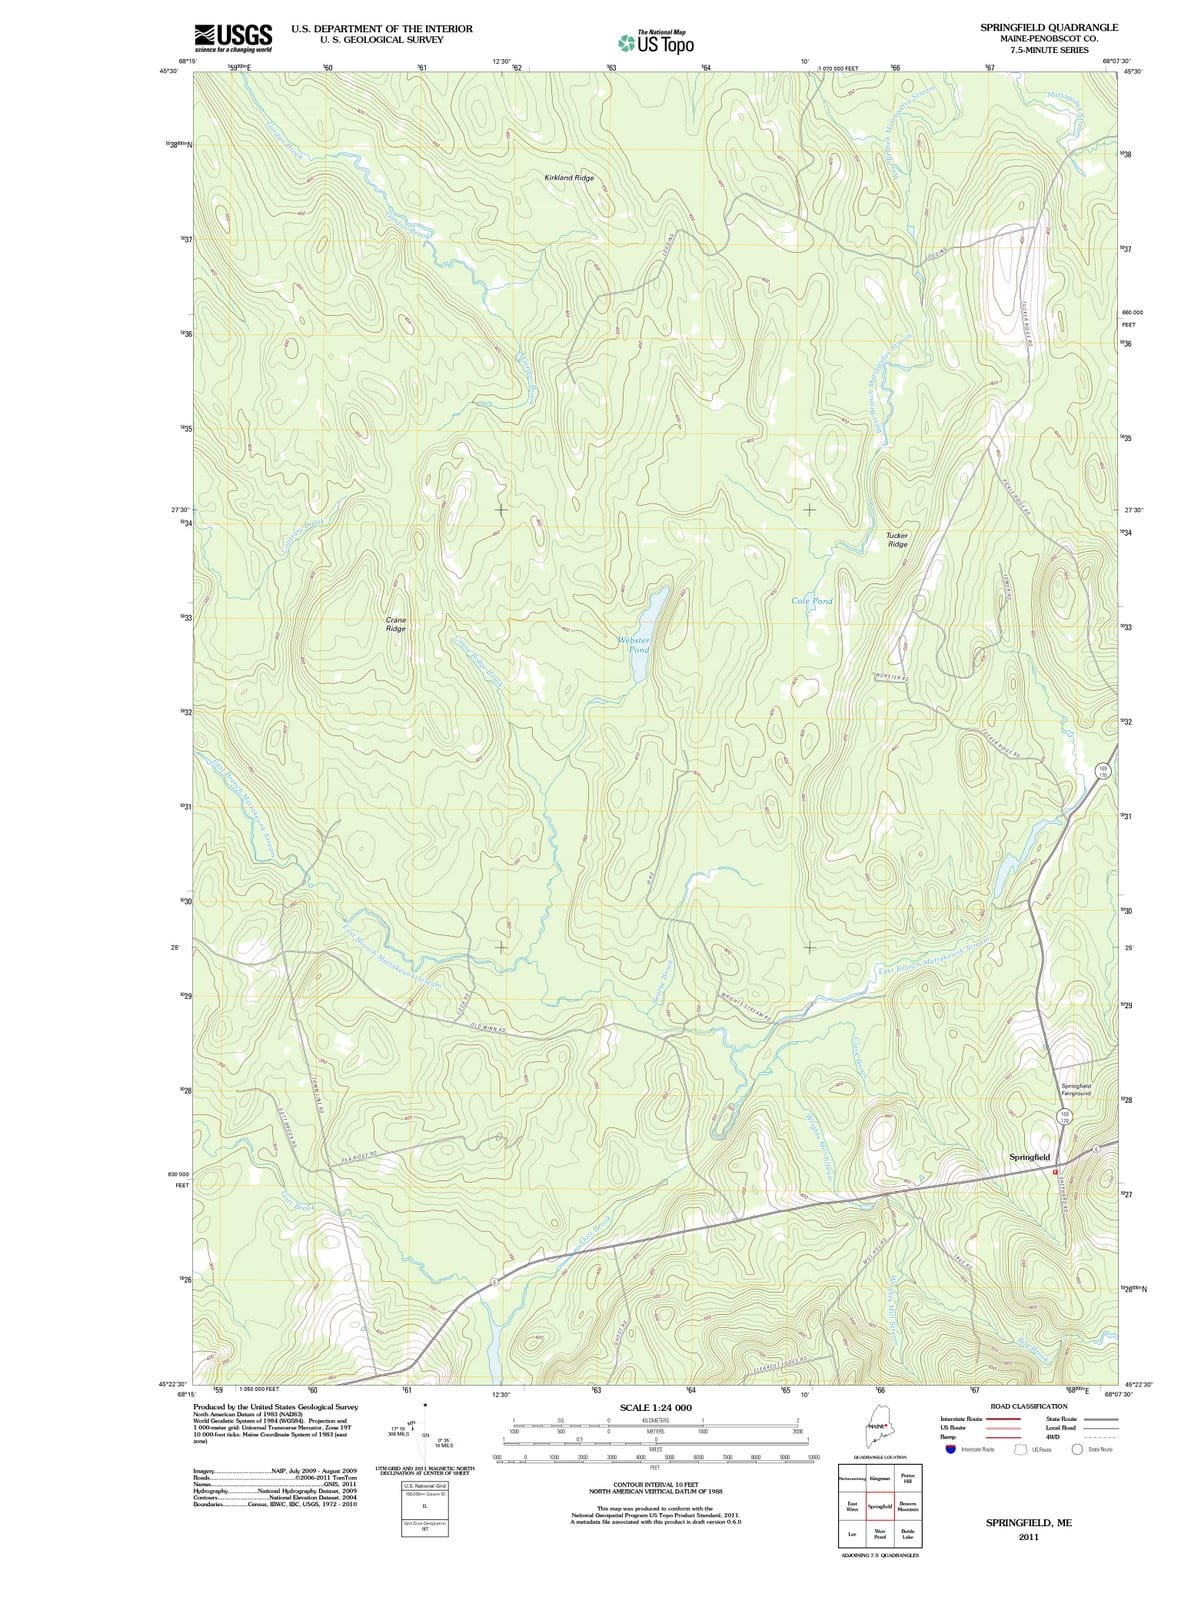 2011 Springfield, ME - Maine - USGS Topographic Map